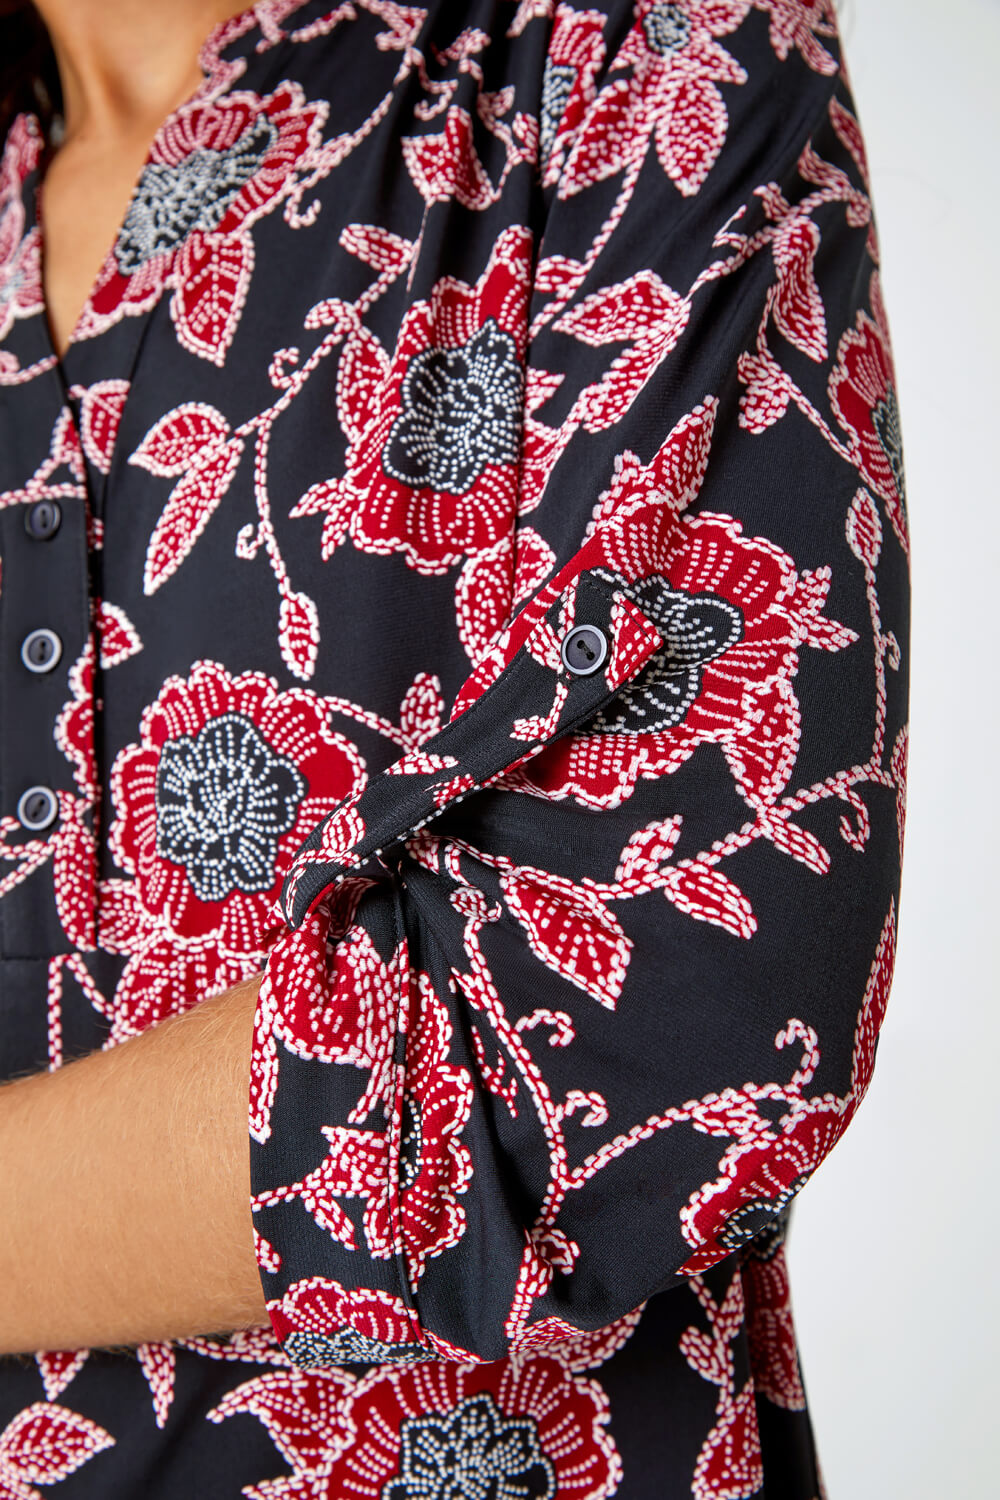 Red Textured Floral Print Stretch Shirt, Image 5 of 5